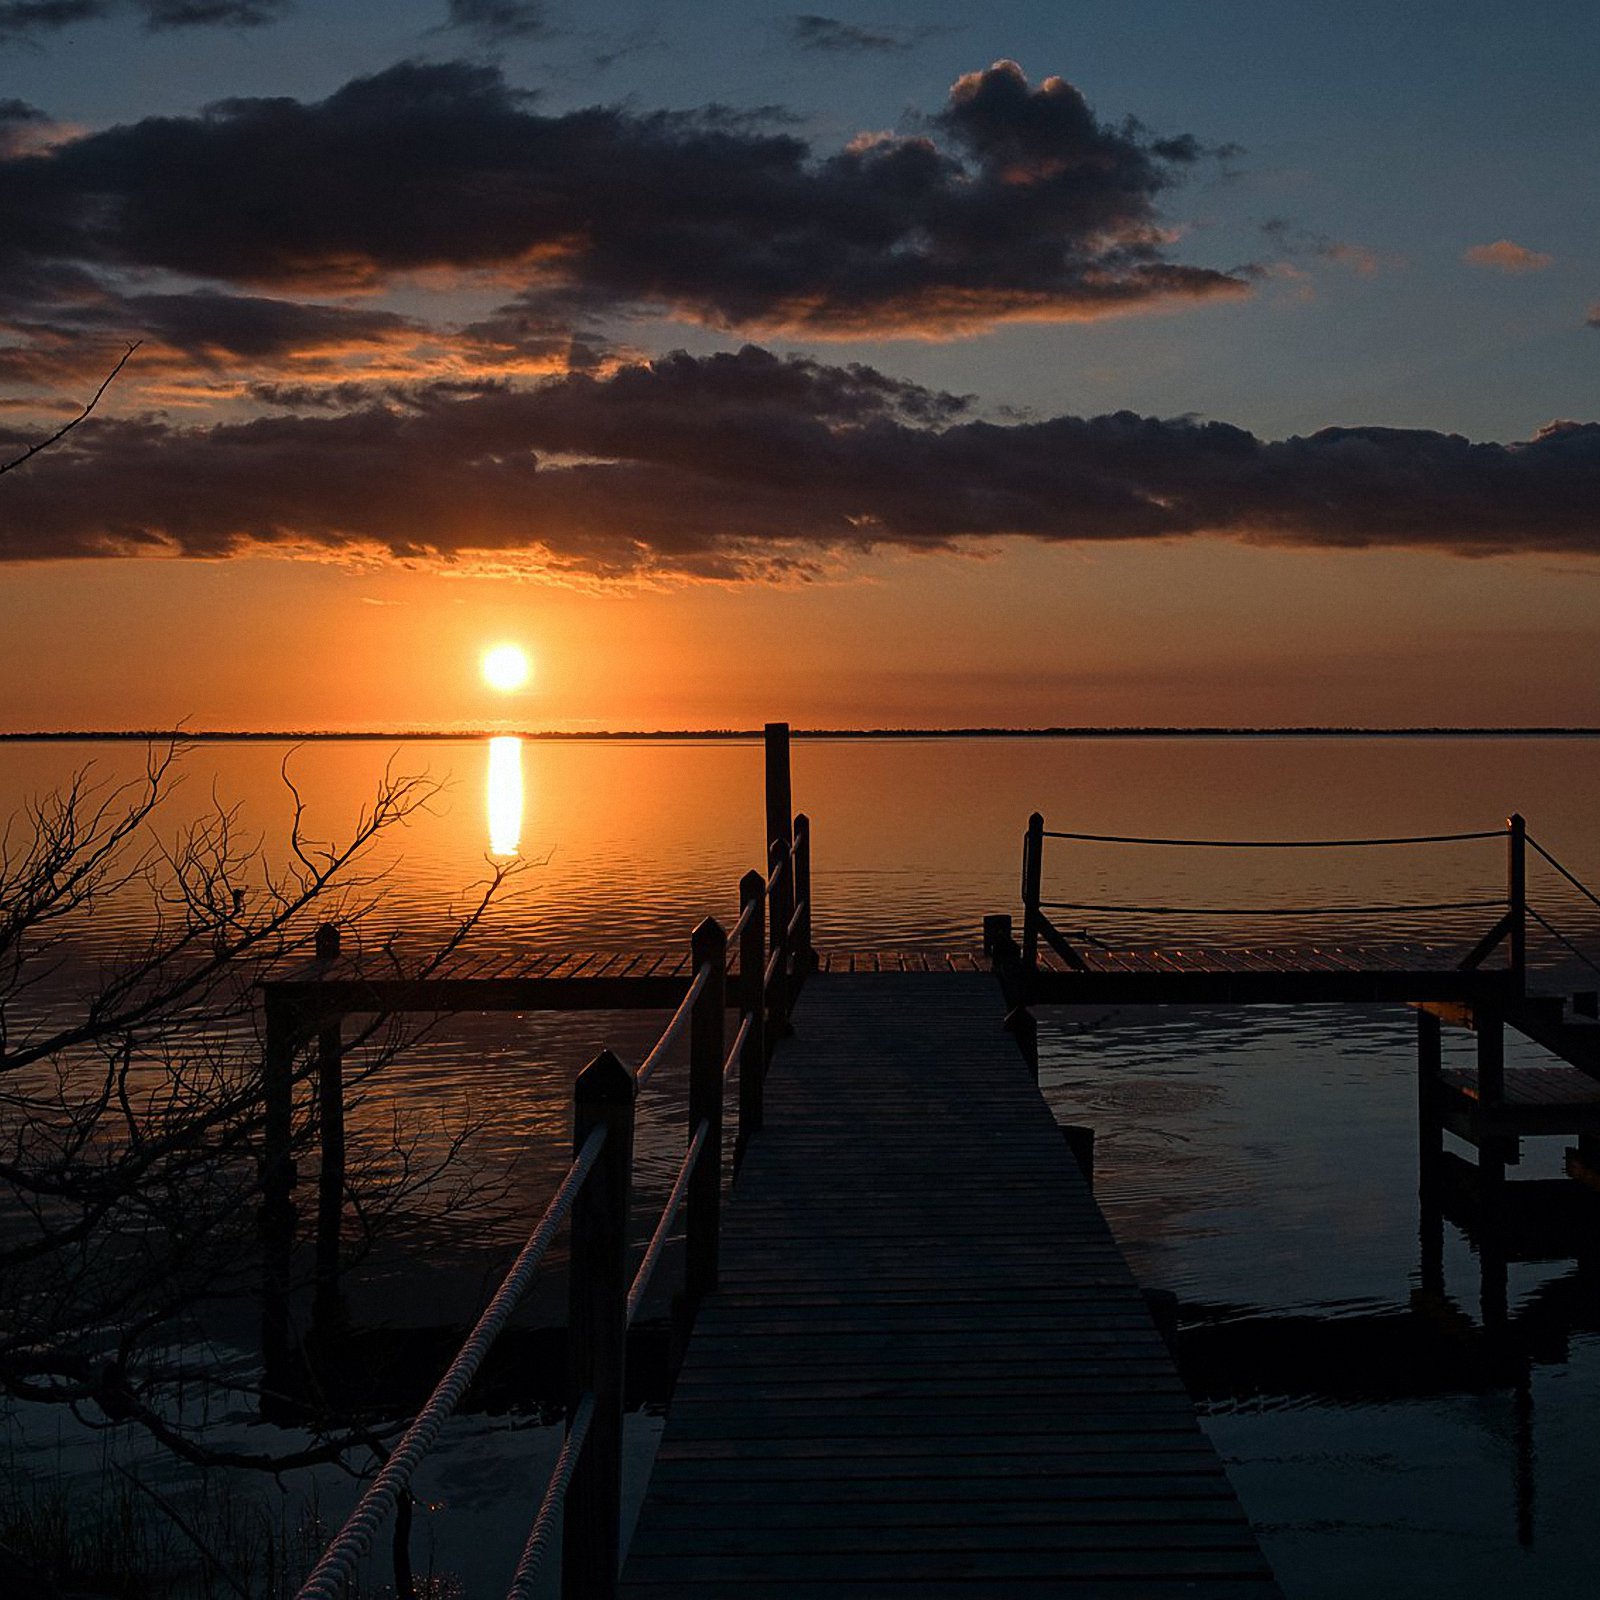 A sunset with a dock in the foreground, looking toward Cape San Blas